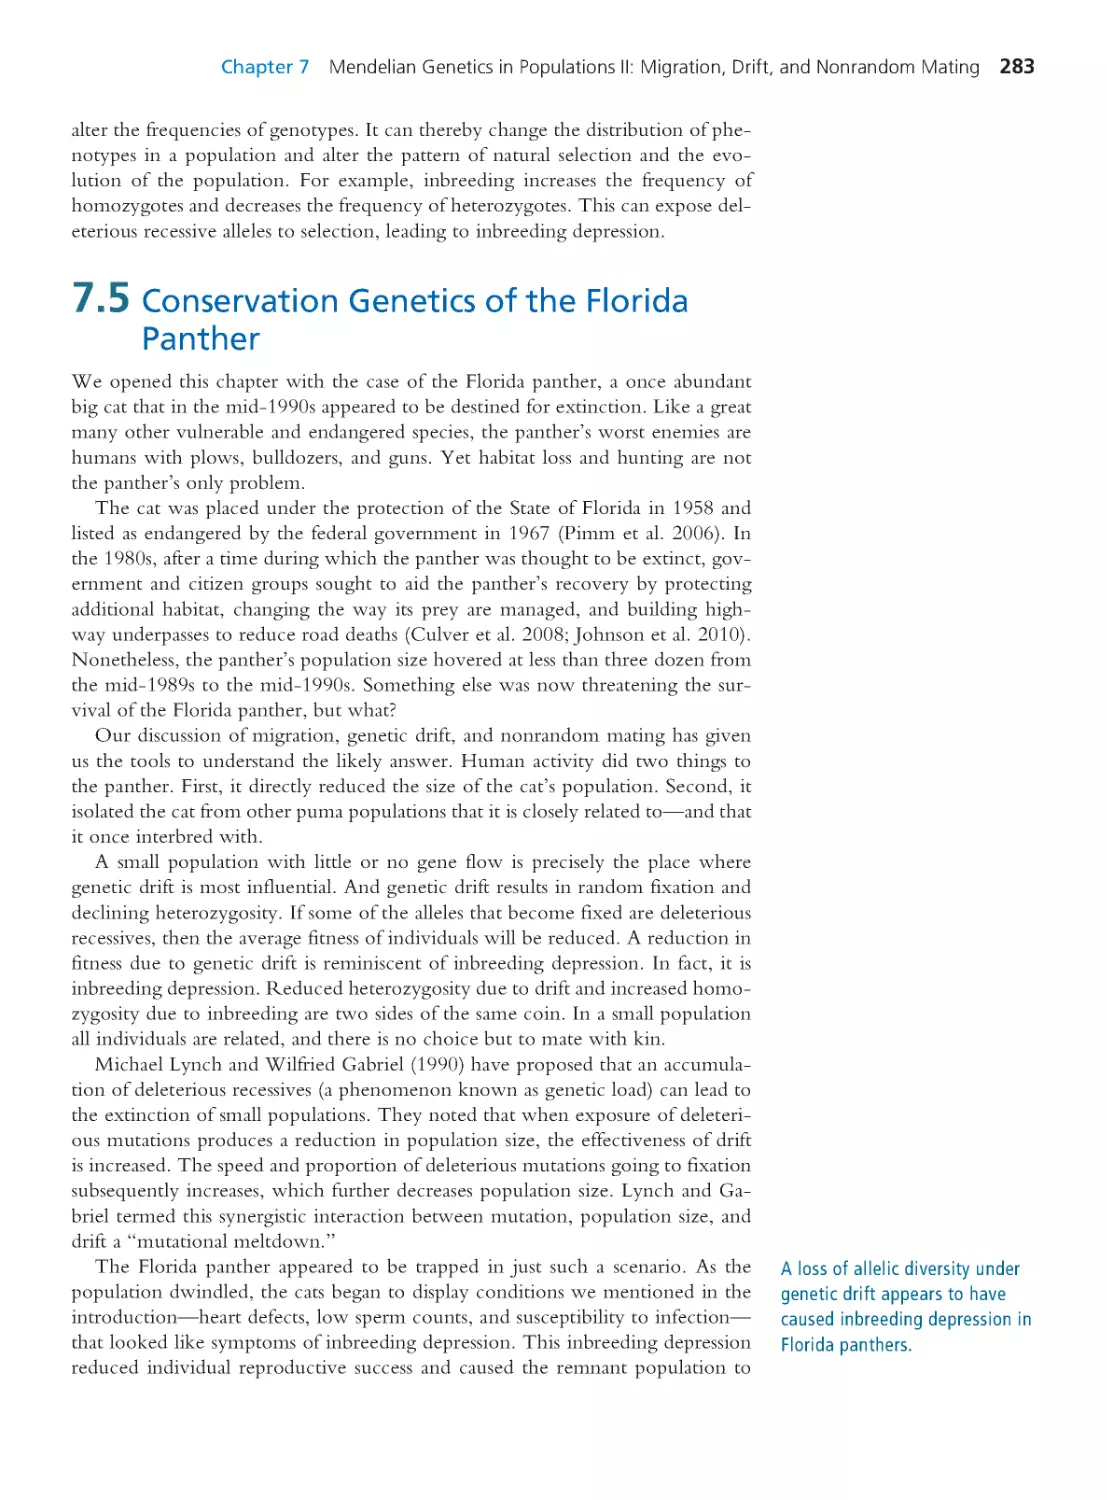 7.5 Conservation Genetics of the Florida Panther